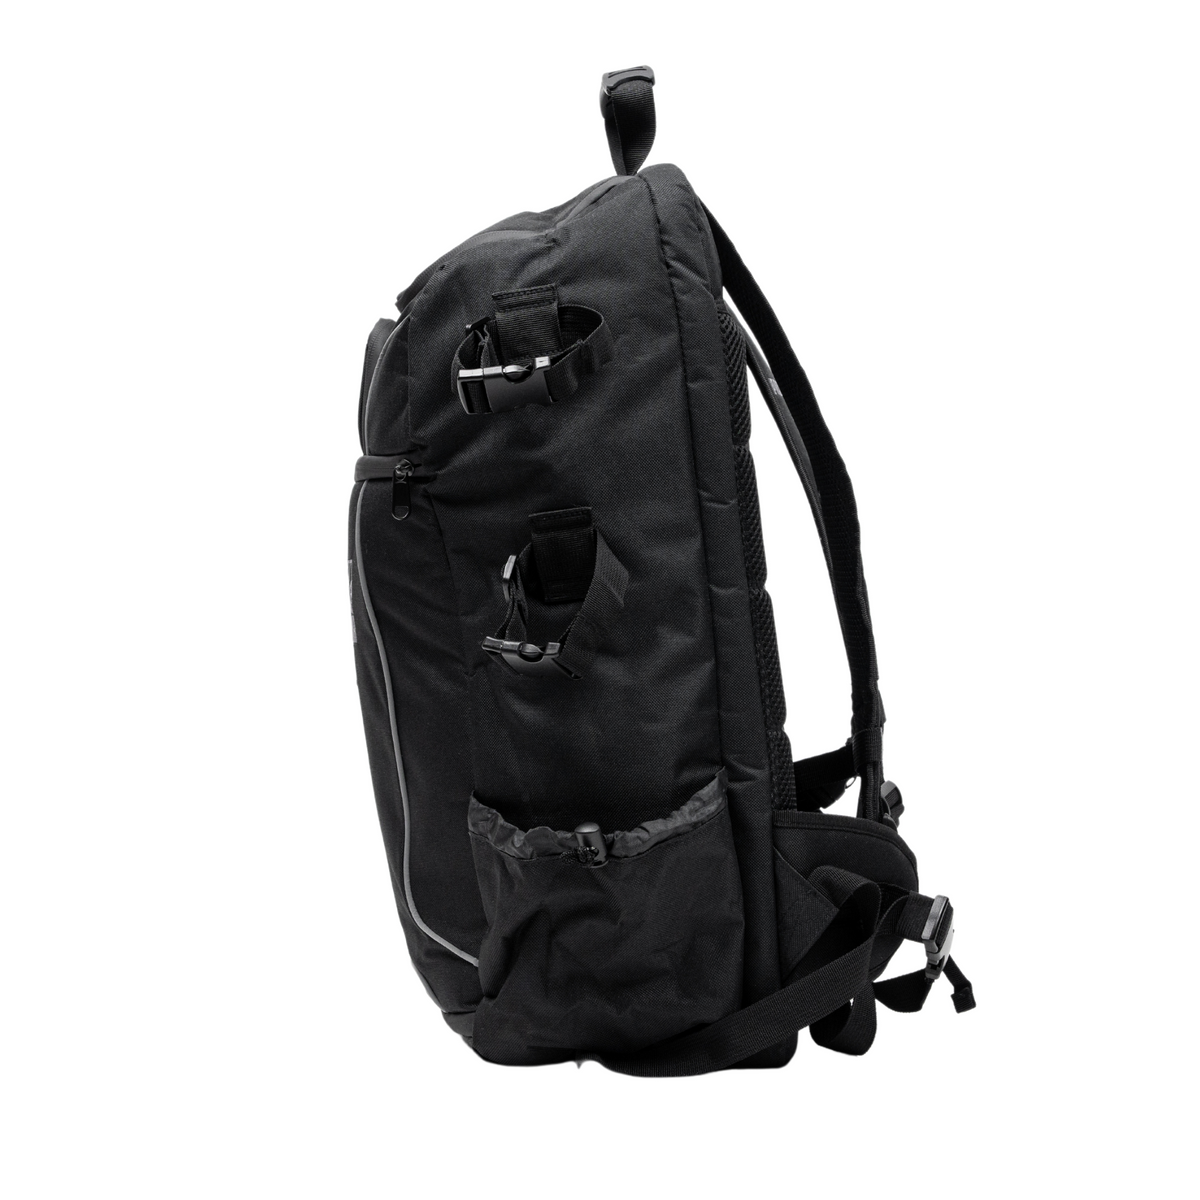 Byway Fishing Backpack with Cooler Compartment | PacBak